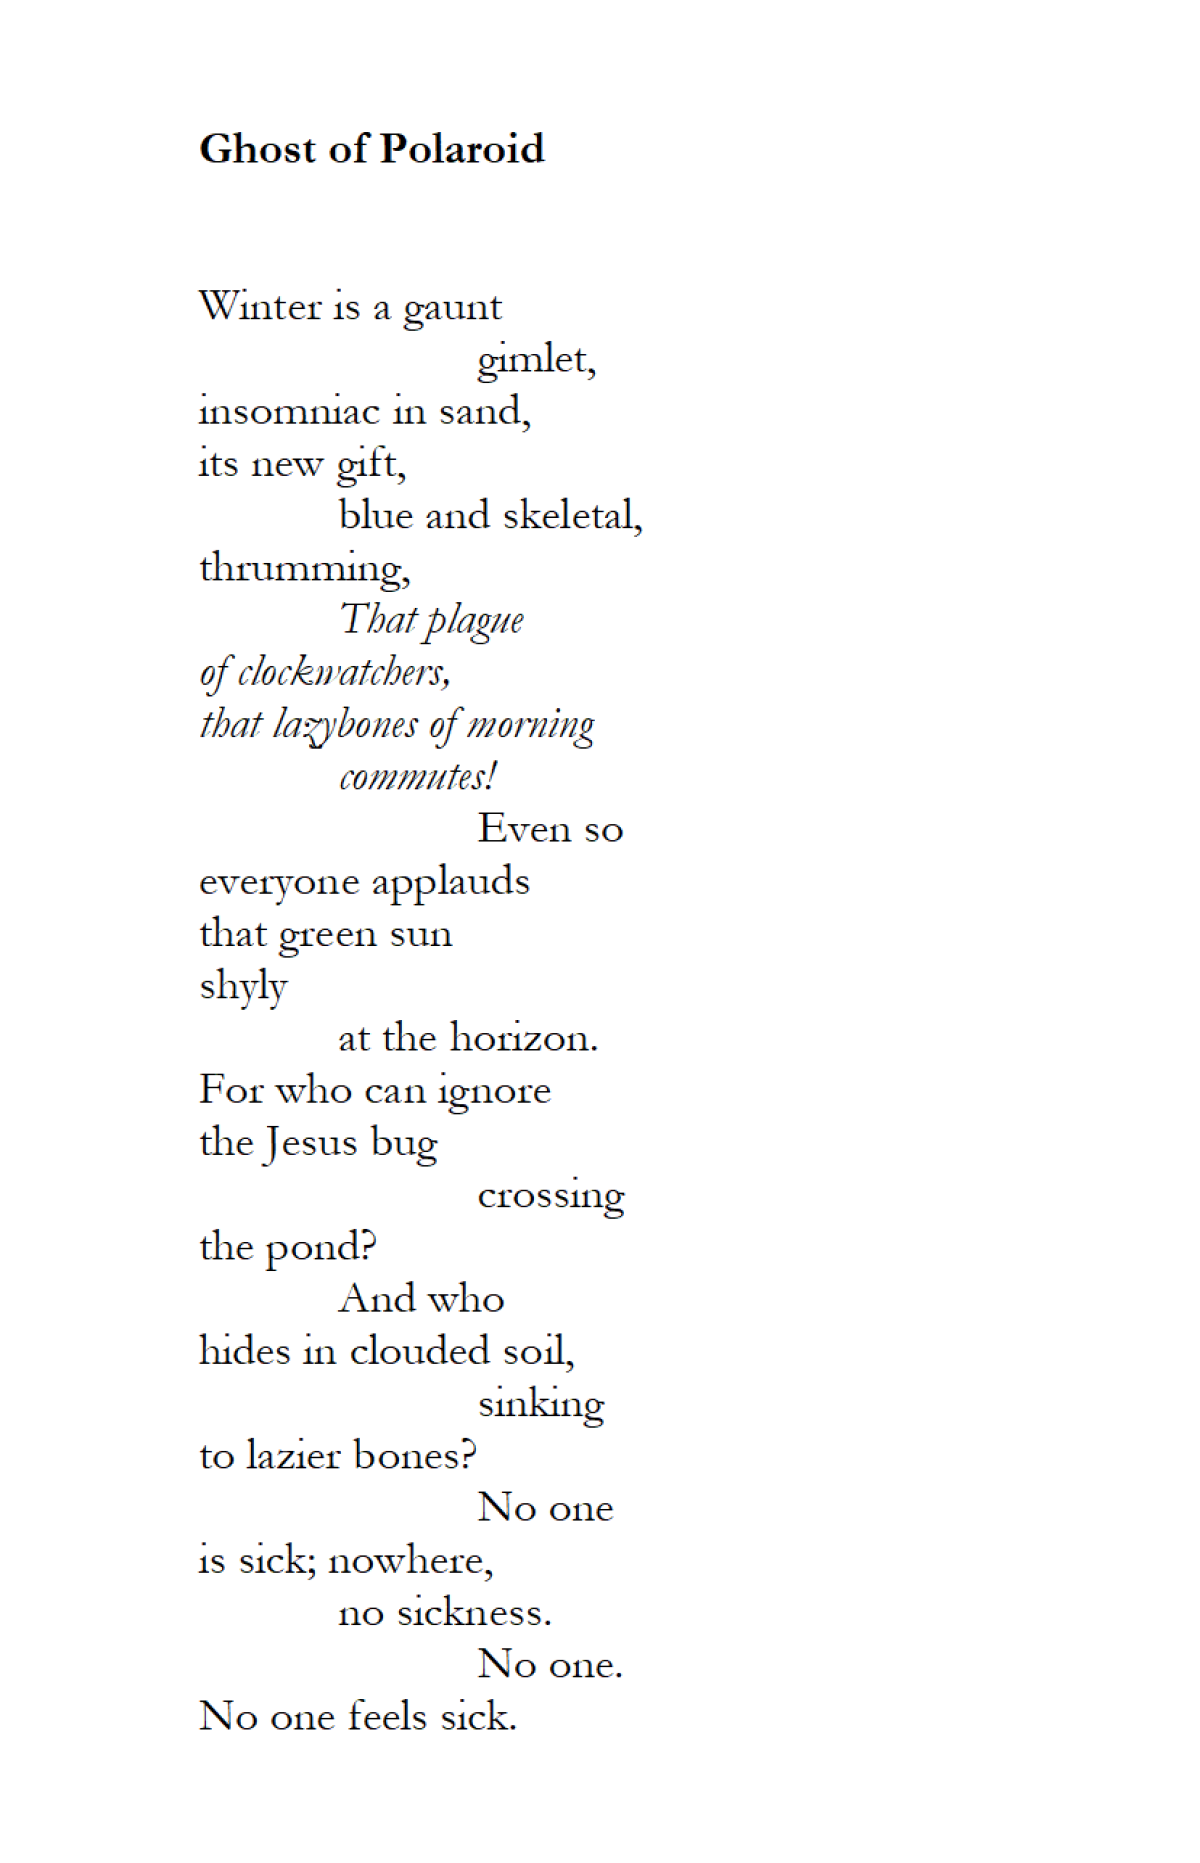 A sample of Adam Davis' poetry in "Index of Haunted Houses."